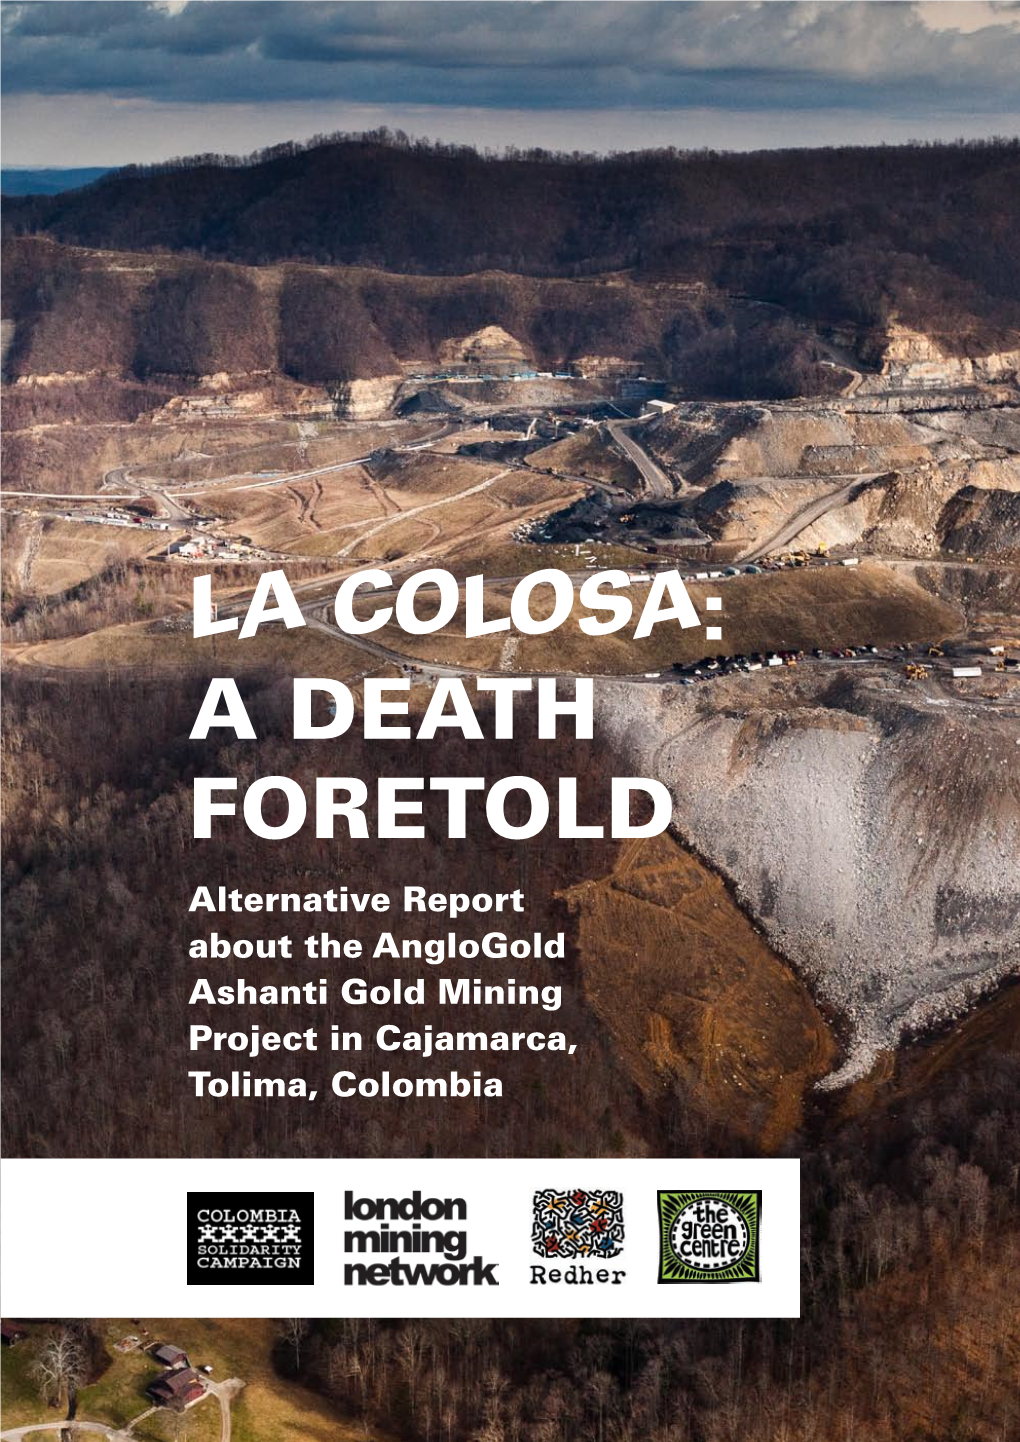 La Colosa: a Death Foretold Alternative Report About the Anglogold Ashanti Gold Mining Project in Cajamarca, Tolima, Colombia